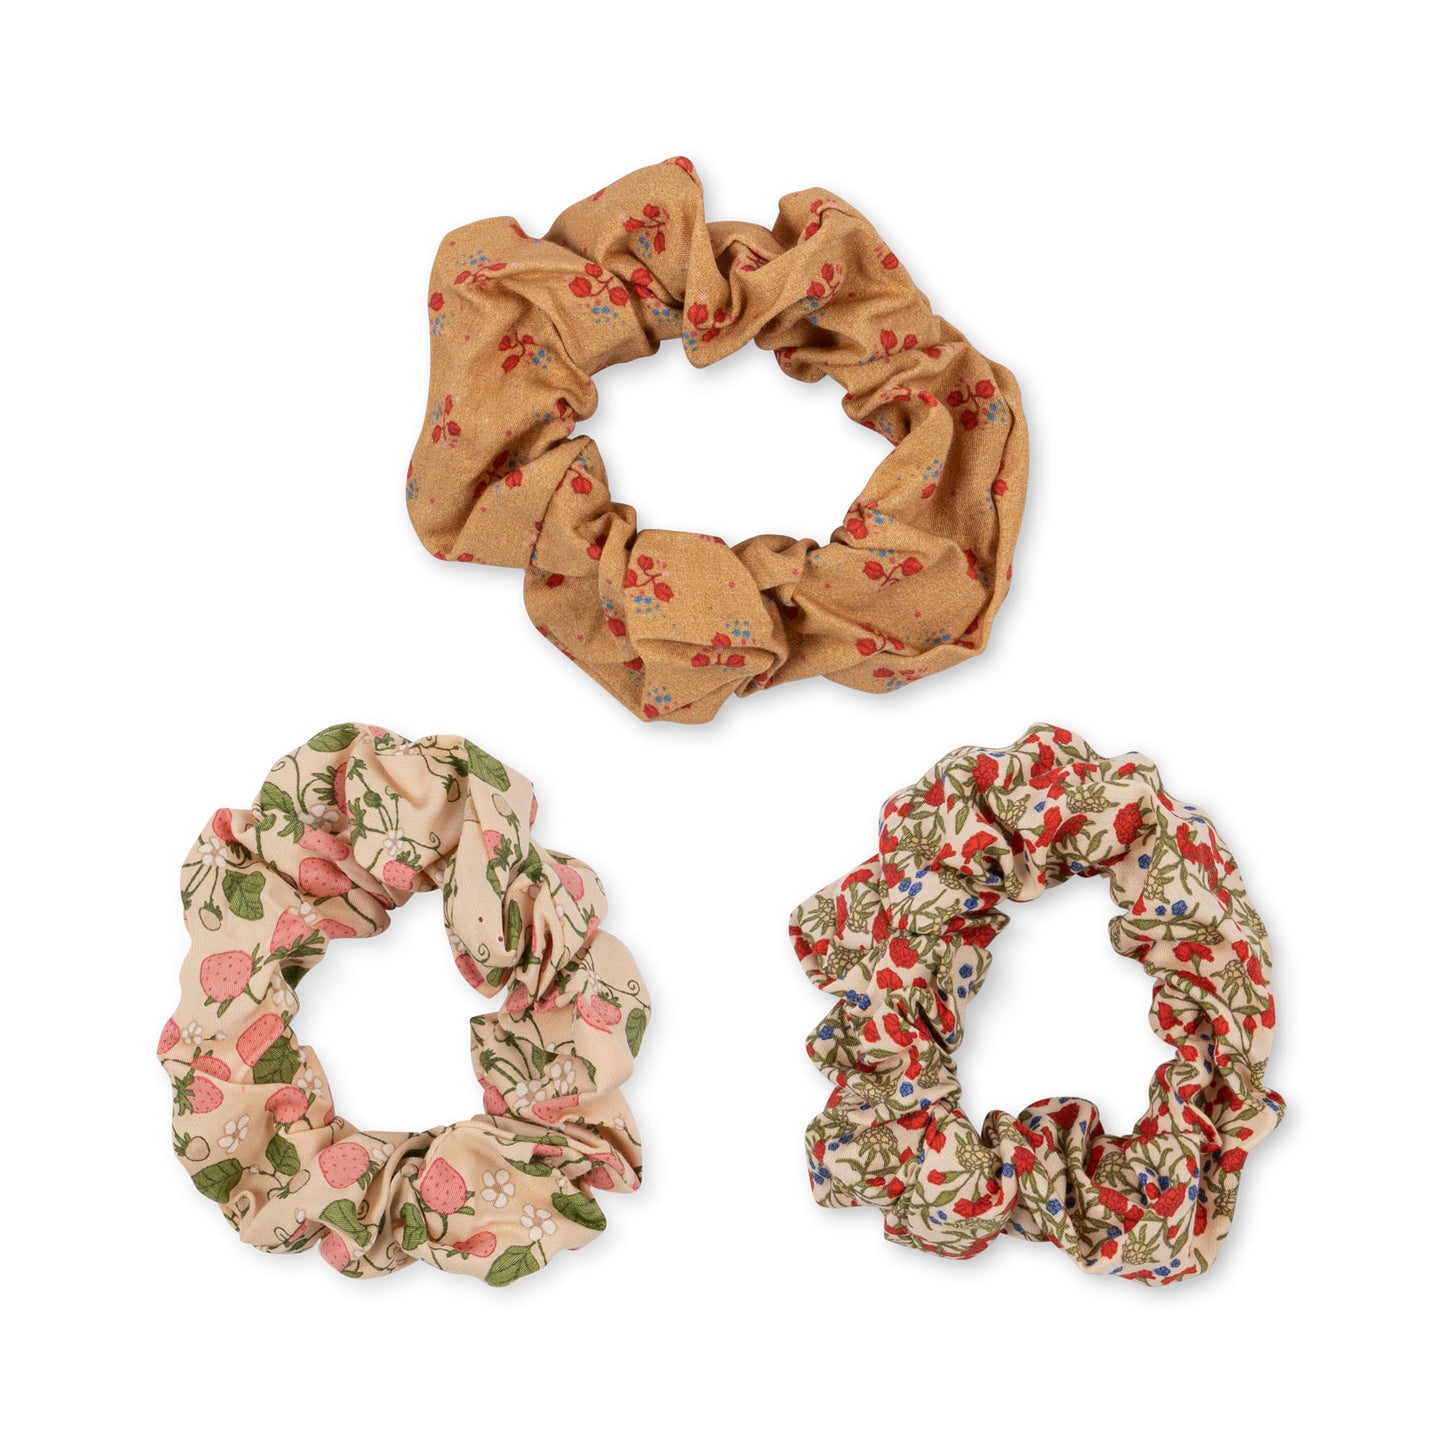 Hair bands set of 3 printed scrunchies